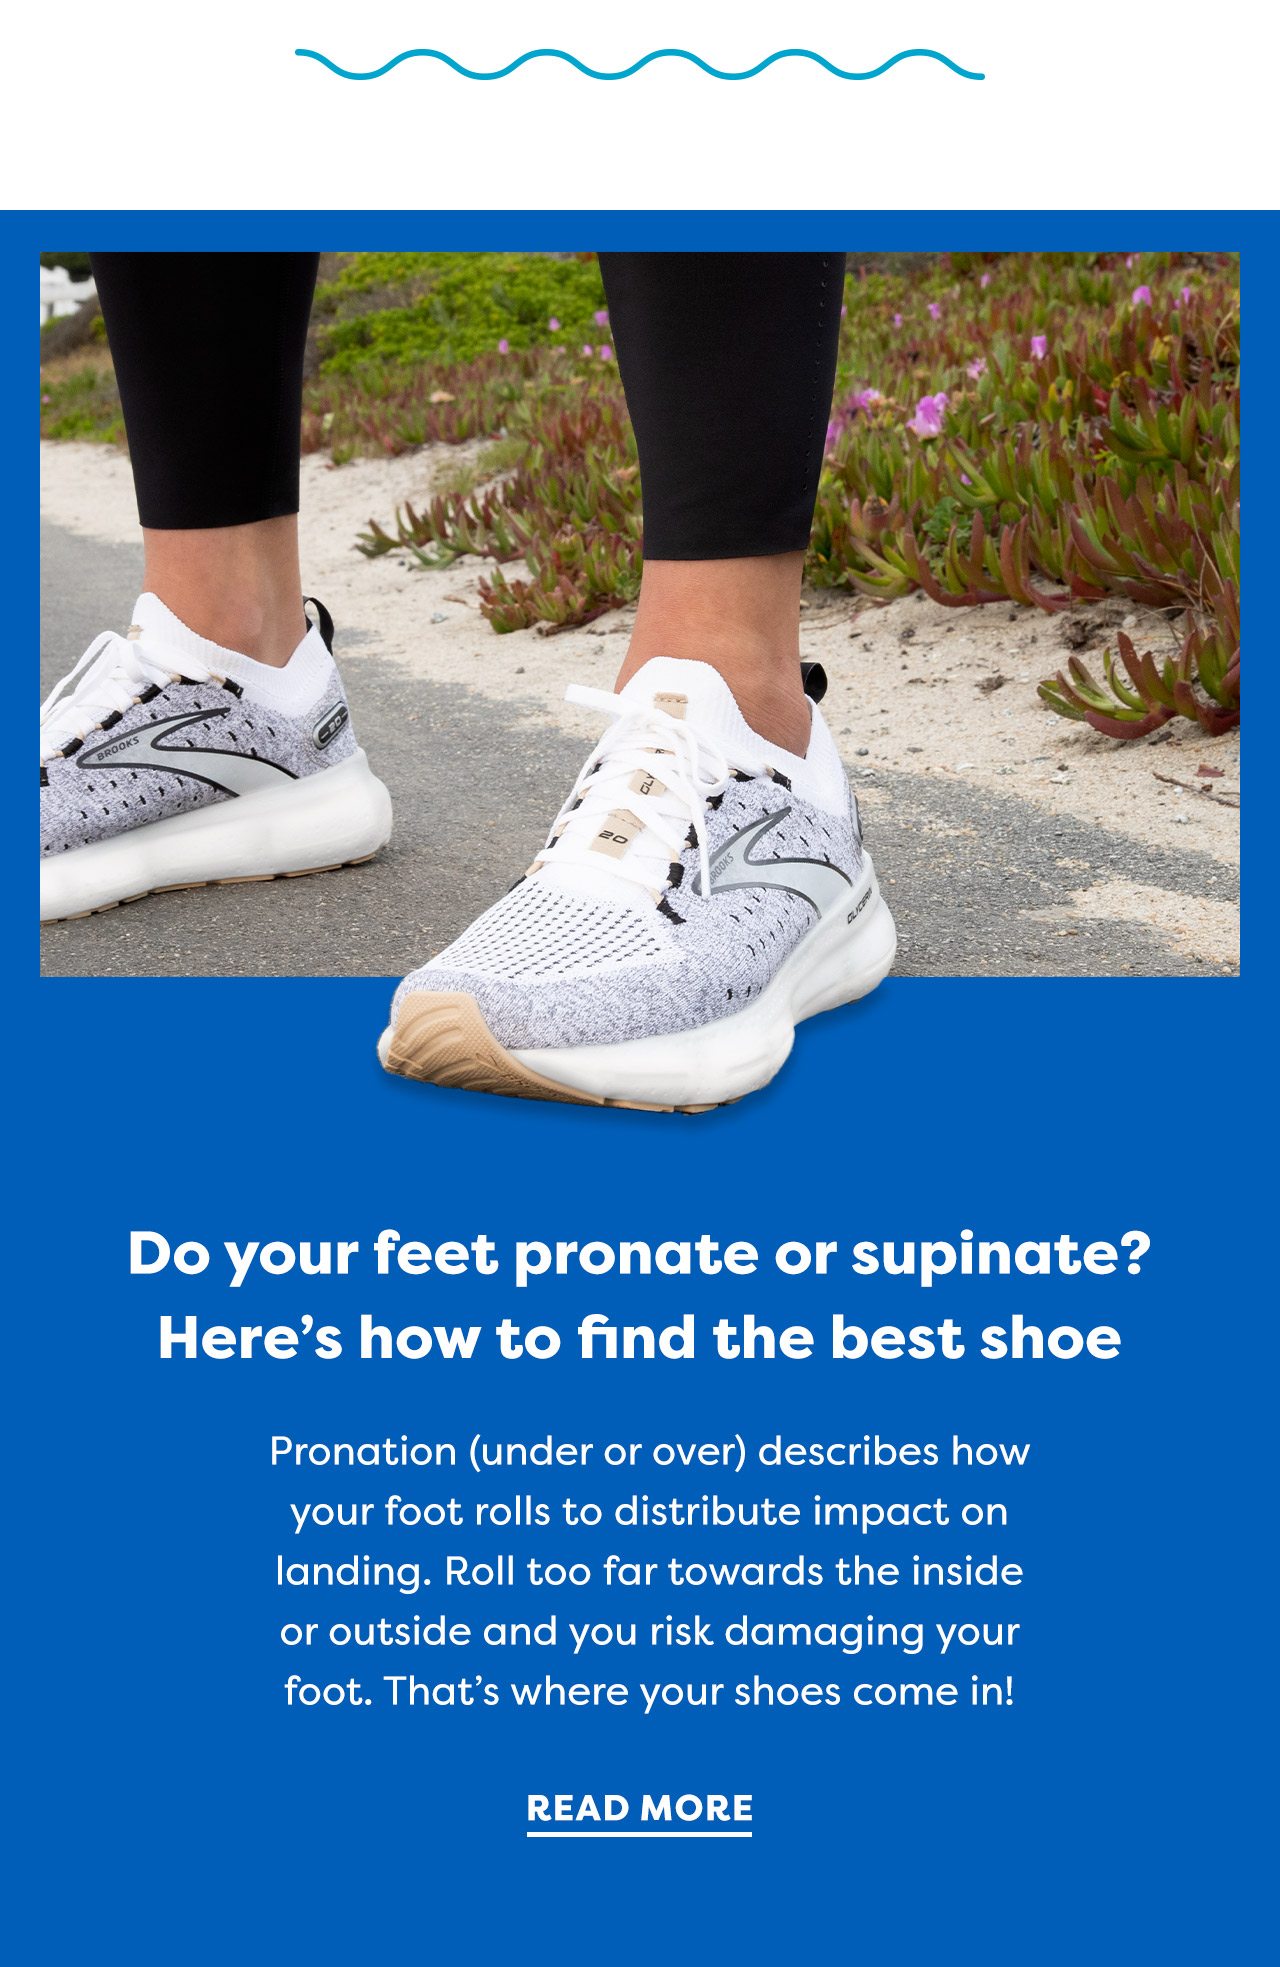 Do your feet pronate or supinate? Here's how to find the best shoe - Pronation (under or over) describes how your foot rolls to distribute impact on landing. Roll too far towards the inside or outside and you risk damanging your foot. That's where your shoes come in! | Read more